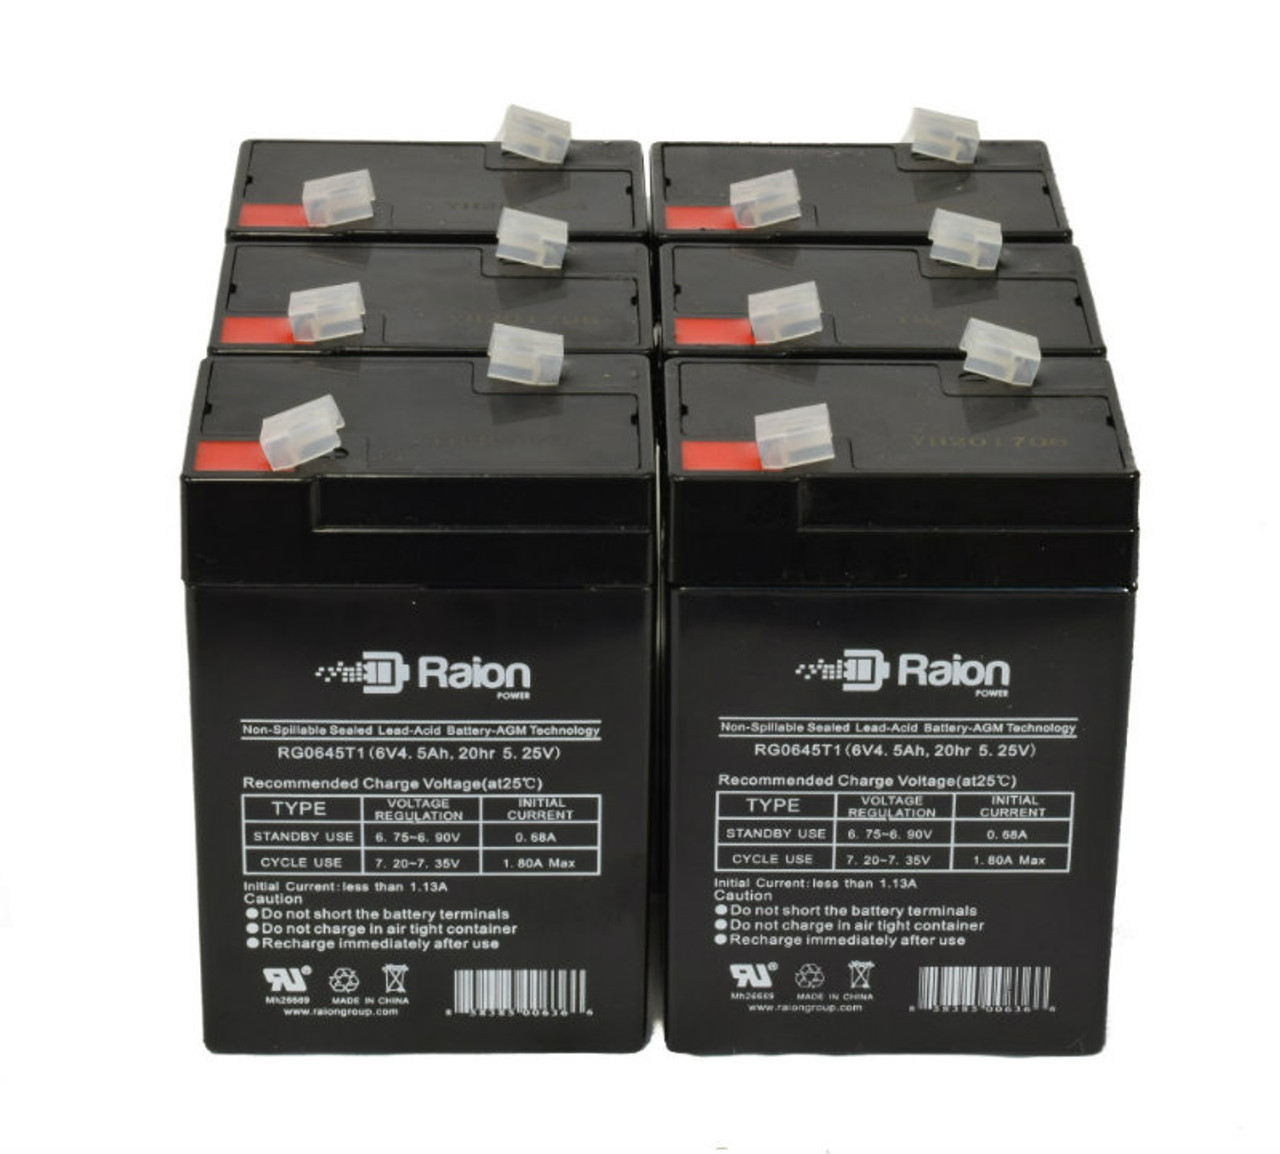 Raion Power 6V 4.5Ah Replacement Emergency Light Battery for GS Portalac PE46RF3CL - 6 Pack